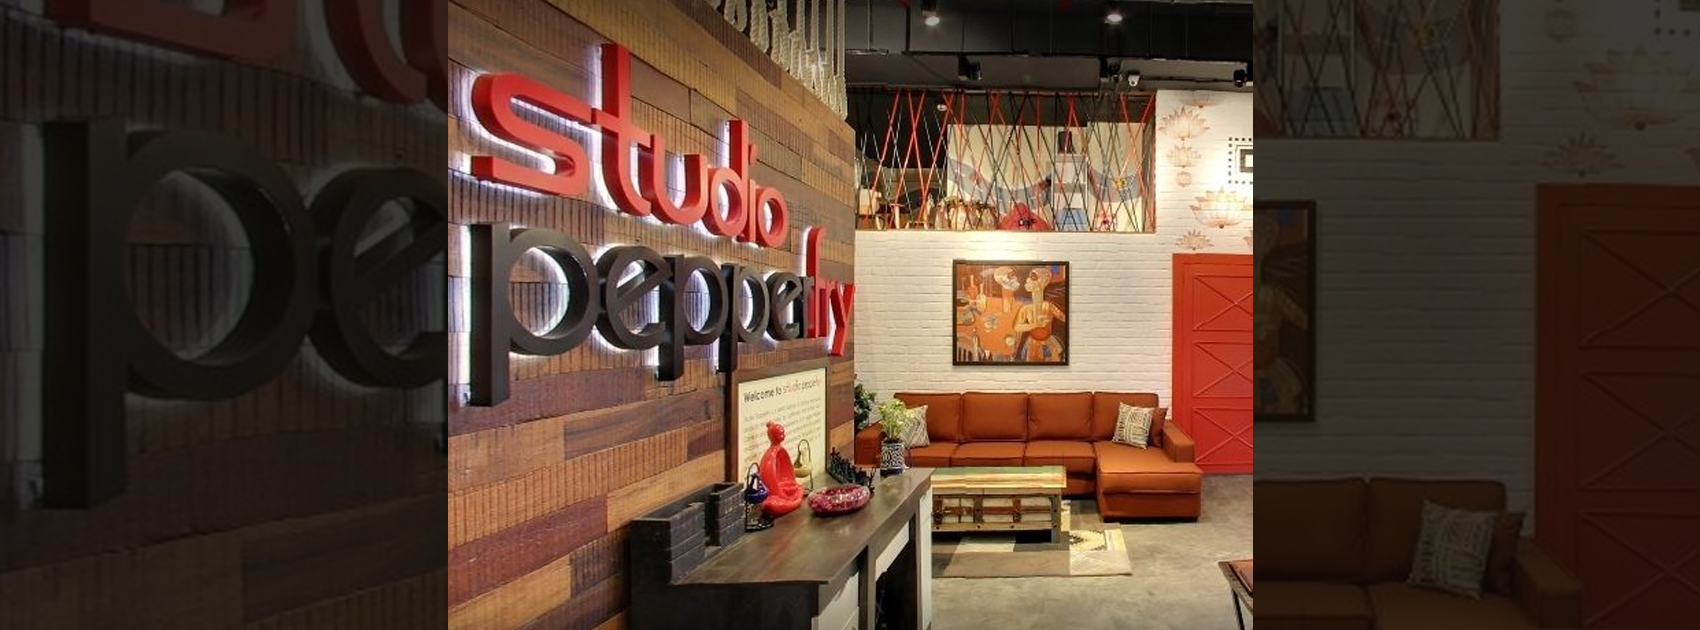 Online Furniture Shopping PepperFry,Startup Stories,Latest Business News 2019,Latest Startup News India,Pepperfry Founders,Pepperfry Furniture,Pepperfry Furniture Store,Pepperfry Inspirational Story,Pepperfry History,Pepperfry Success Story,PepperFry Latest News,Furniture Retailer Pepperfry